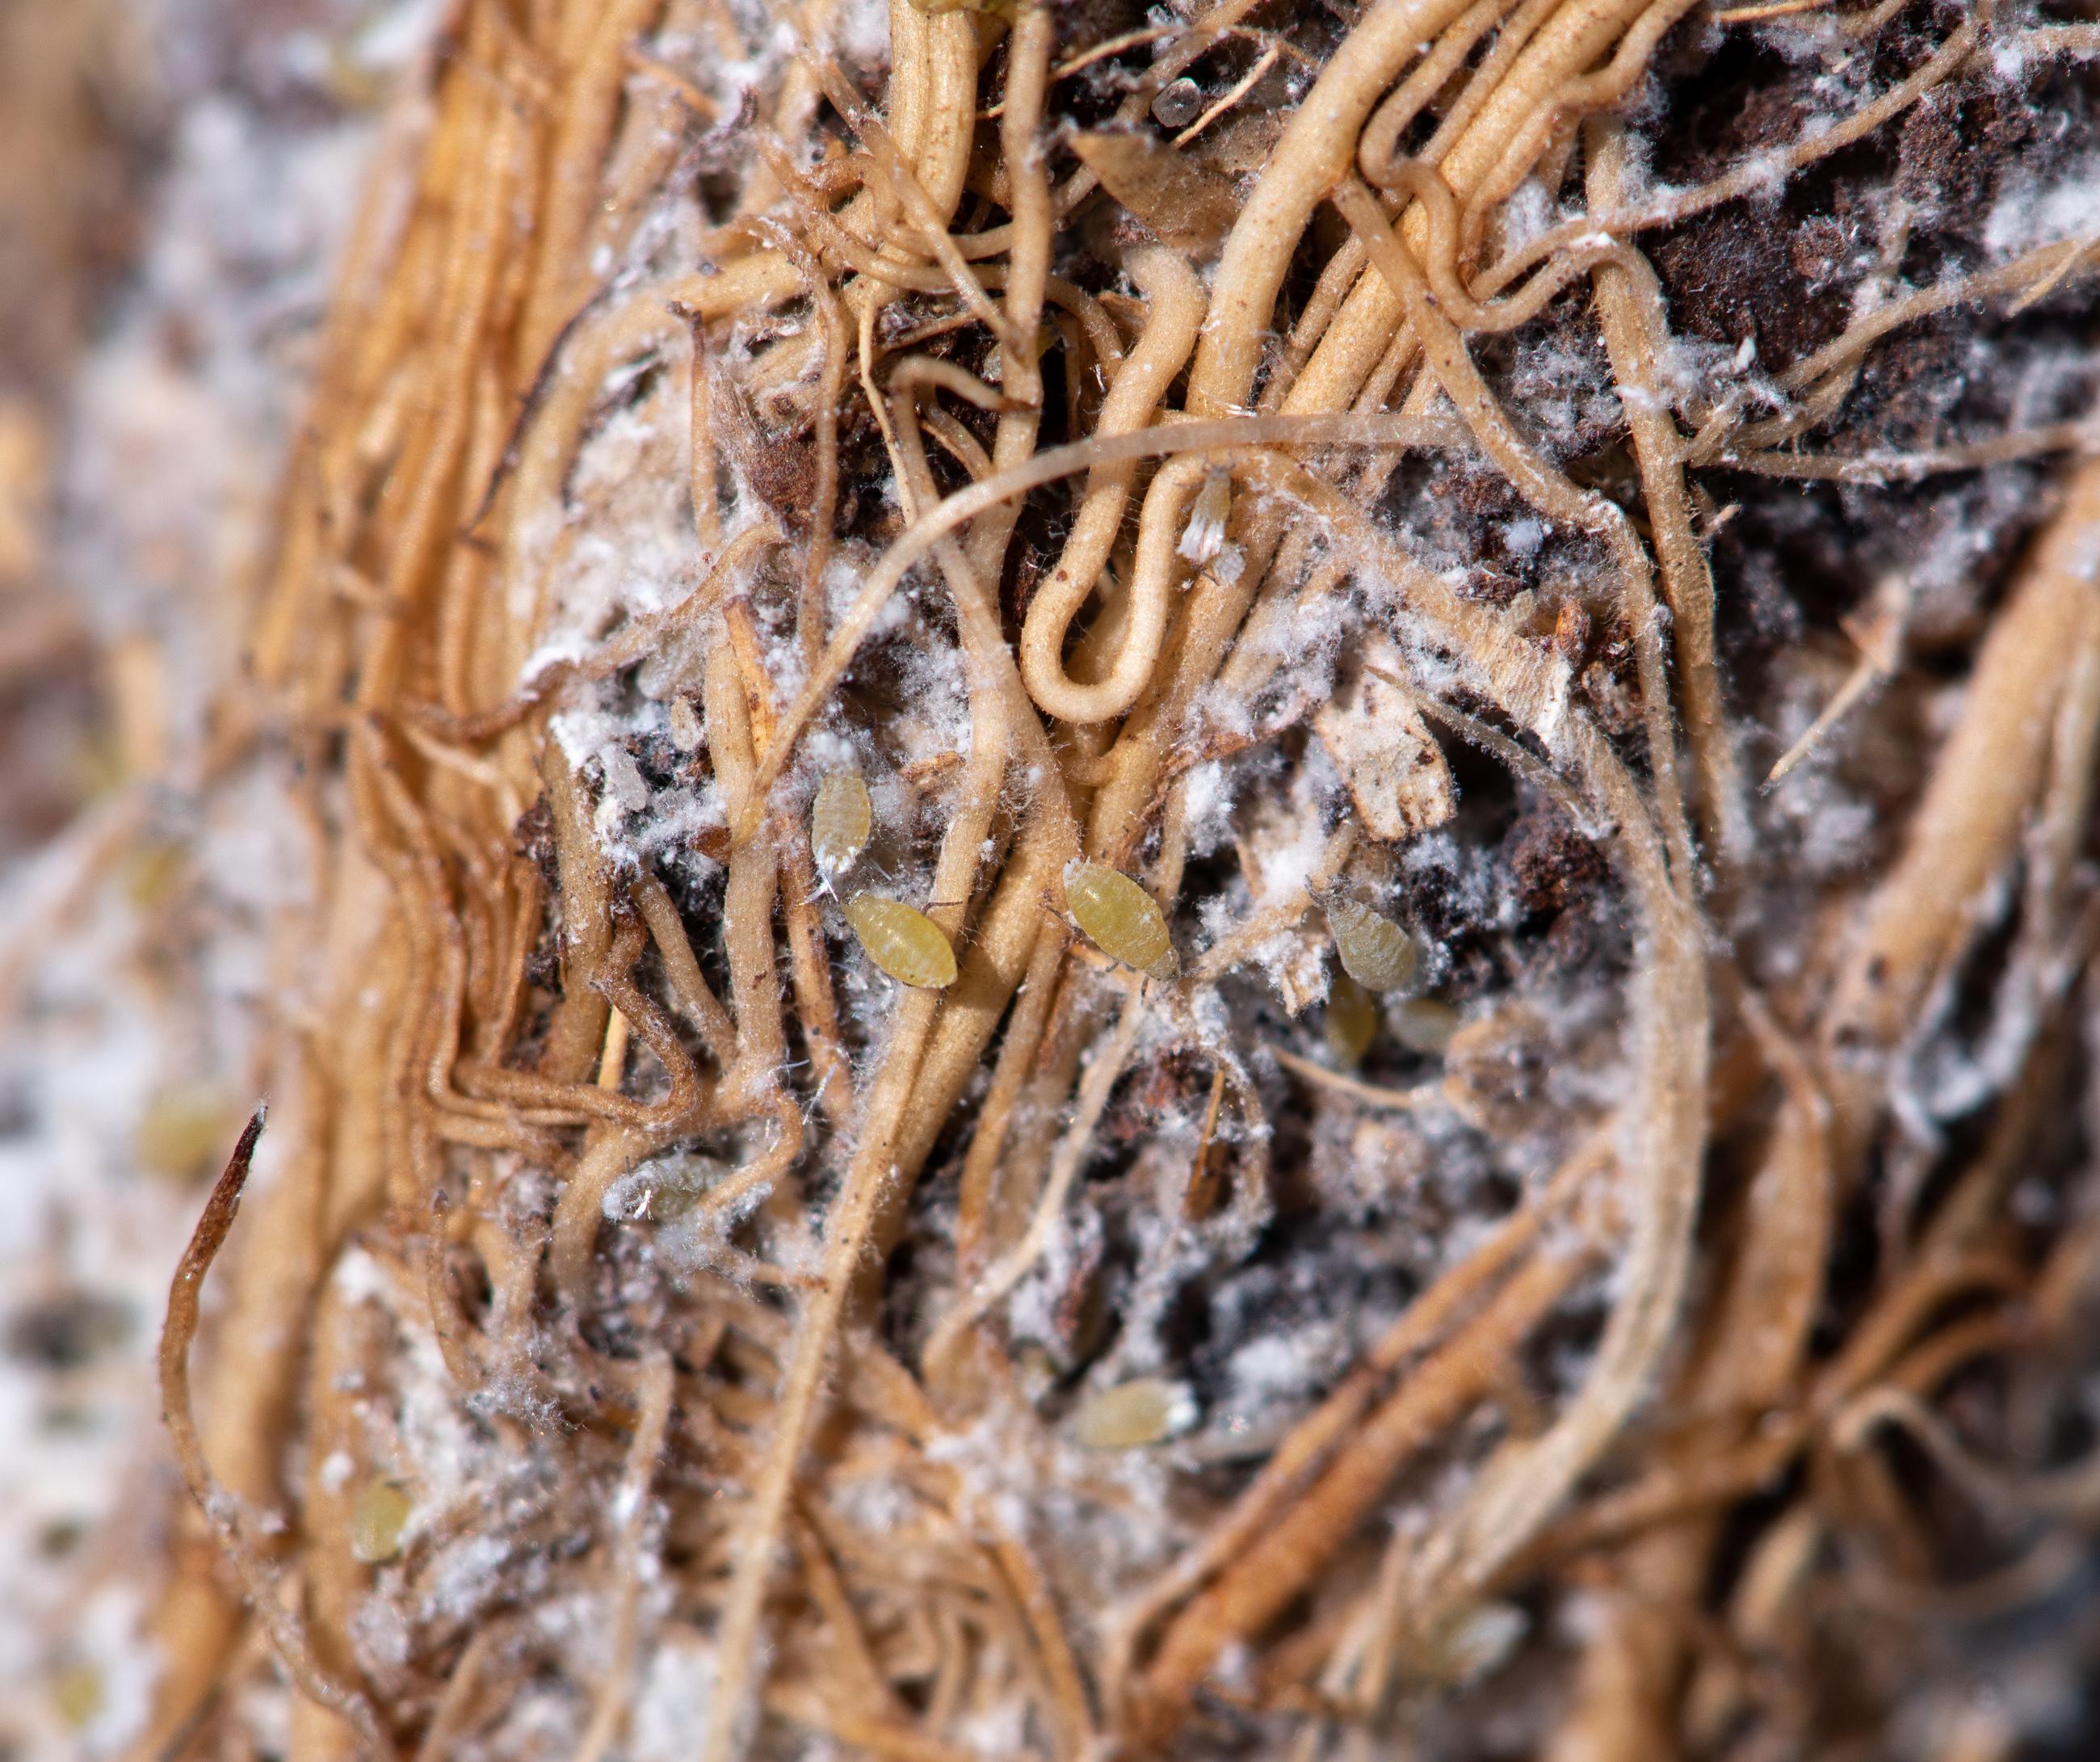 Root aphids on the roots of Bigelowia plant